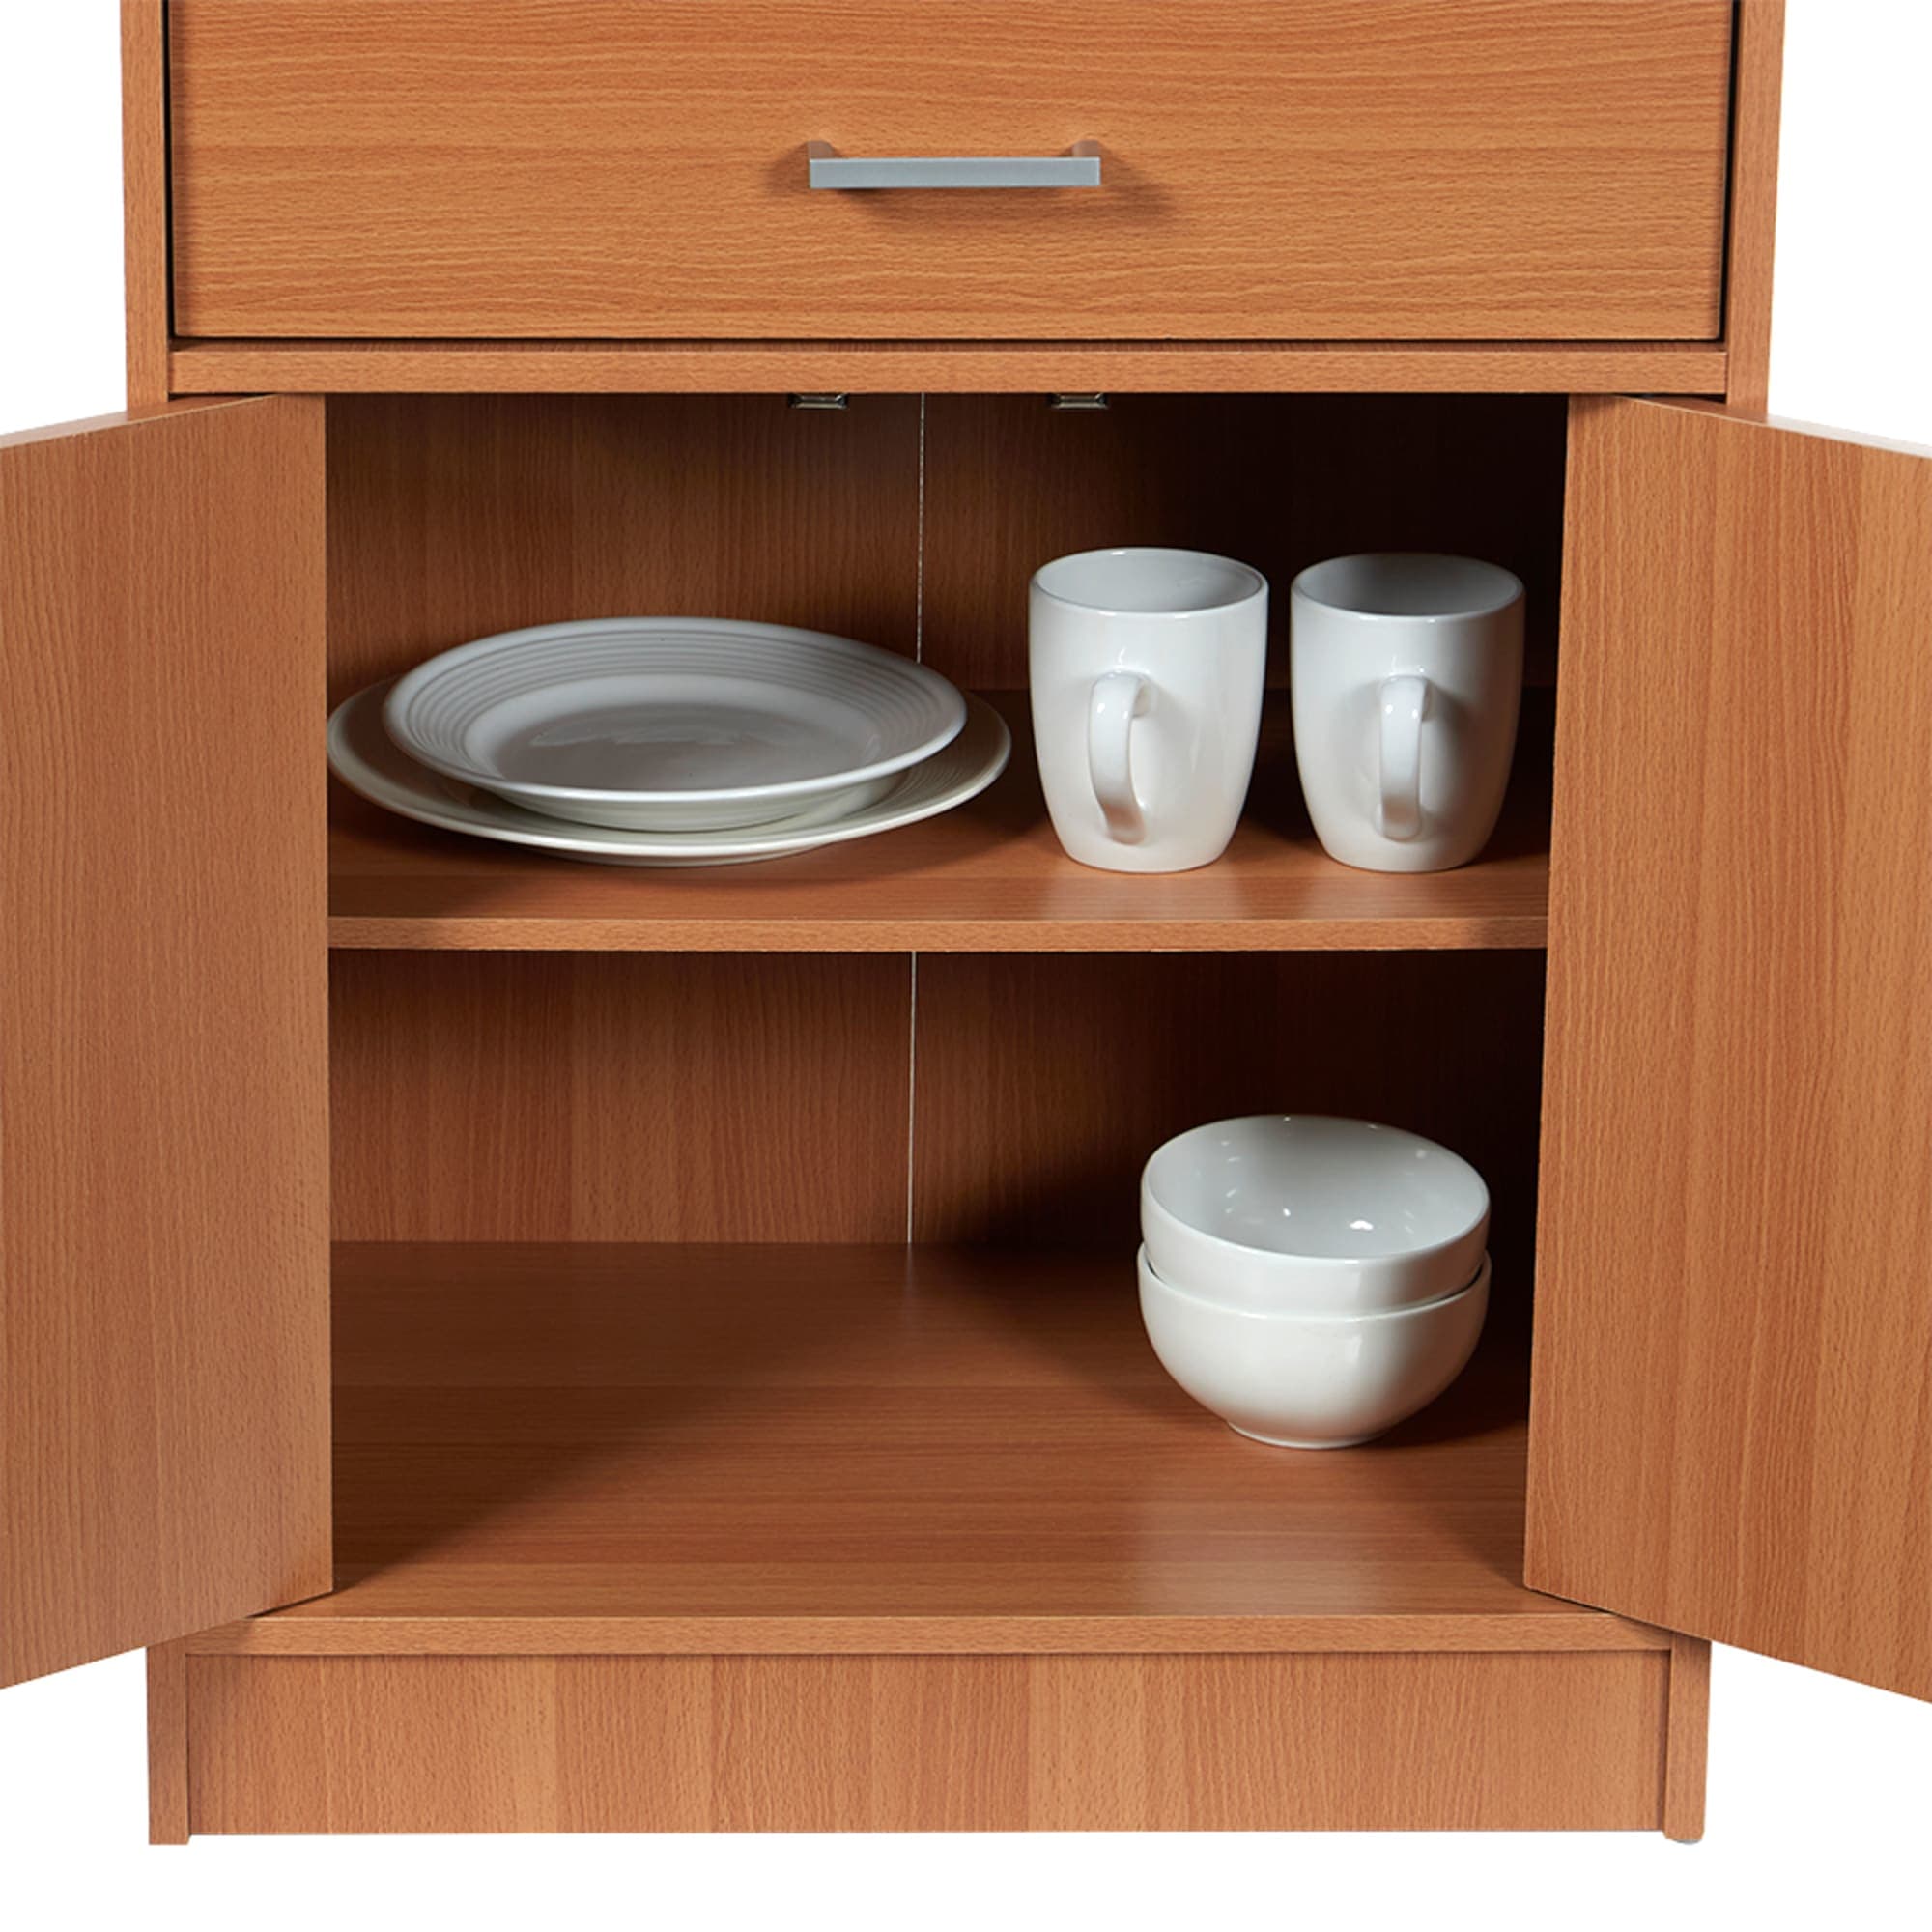 Home Basics Large Wood Microwave Cabinet, Natural $120.00 EACH, CASE PACK OF 1